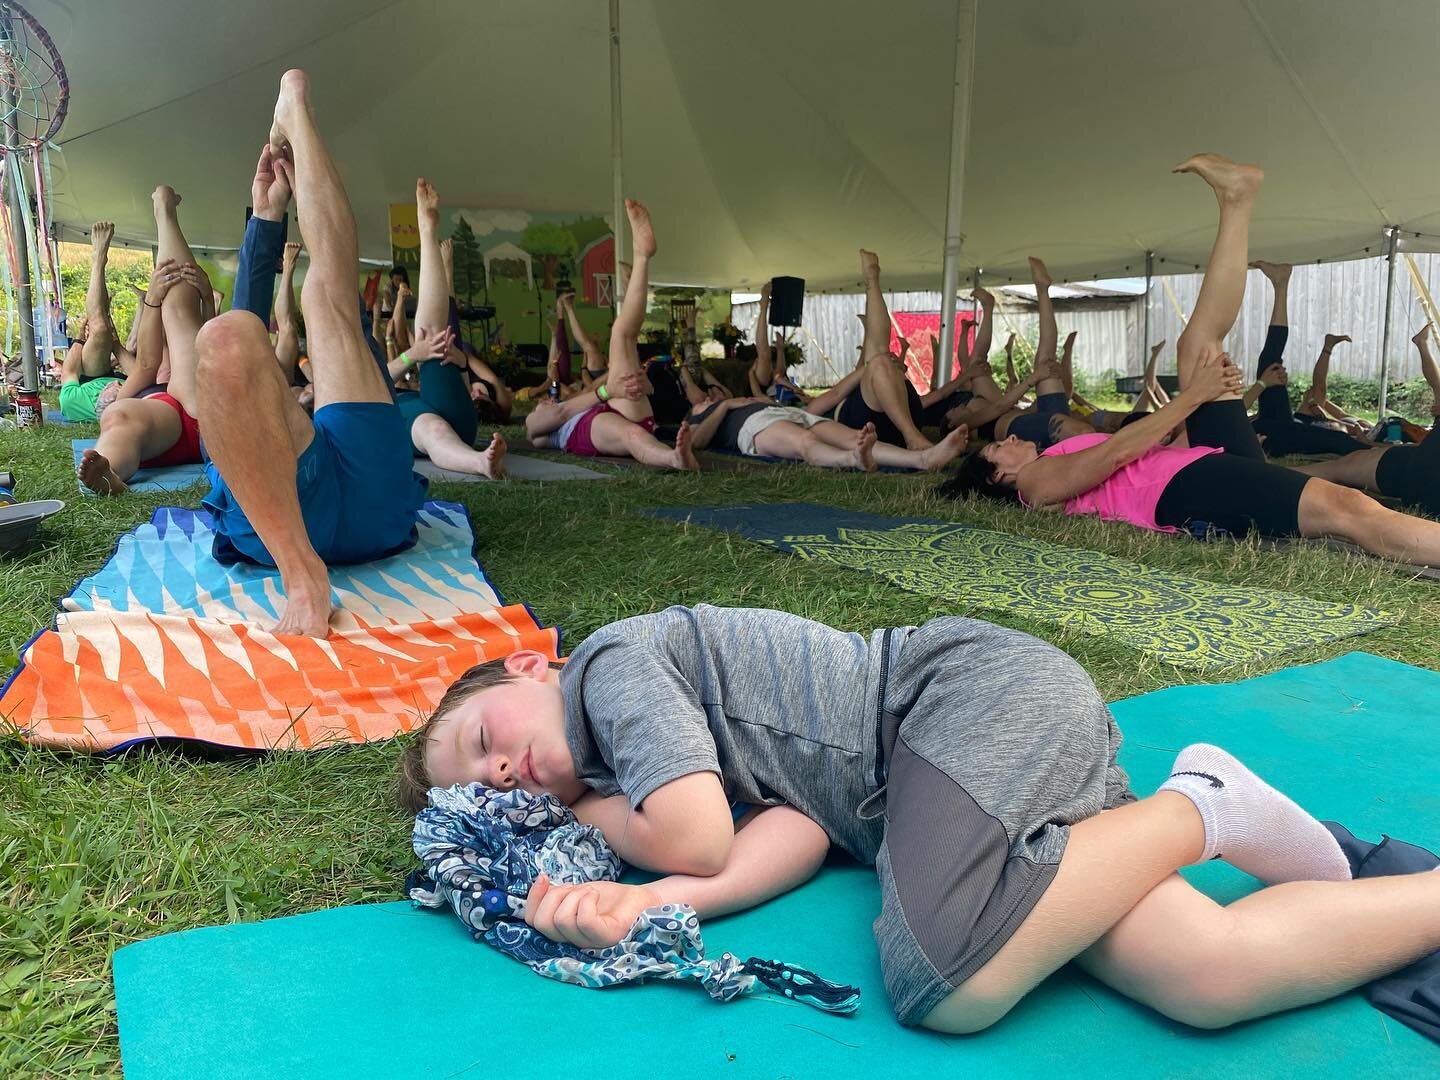 Show up in this wild and beautiful world exactly as you are! 
You will be held no matter what
💚

#vtbtyogafest7
#vtbtyogafest2023 #vtbtyogafest #milldalefarmwellness #community #yogafestival #yoga #festival #summer2023 #connection #realtime #peace #